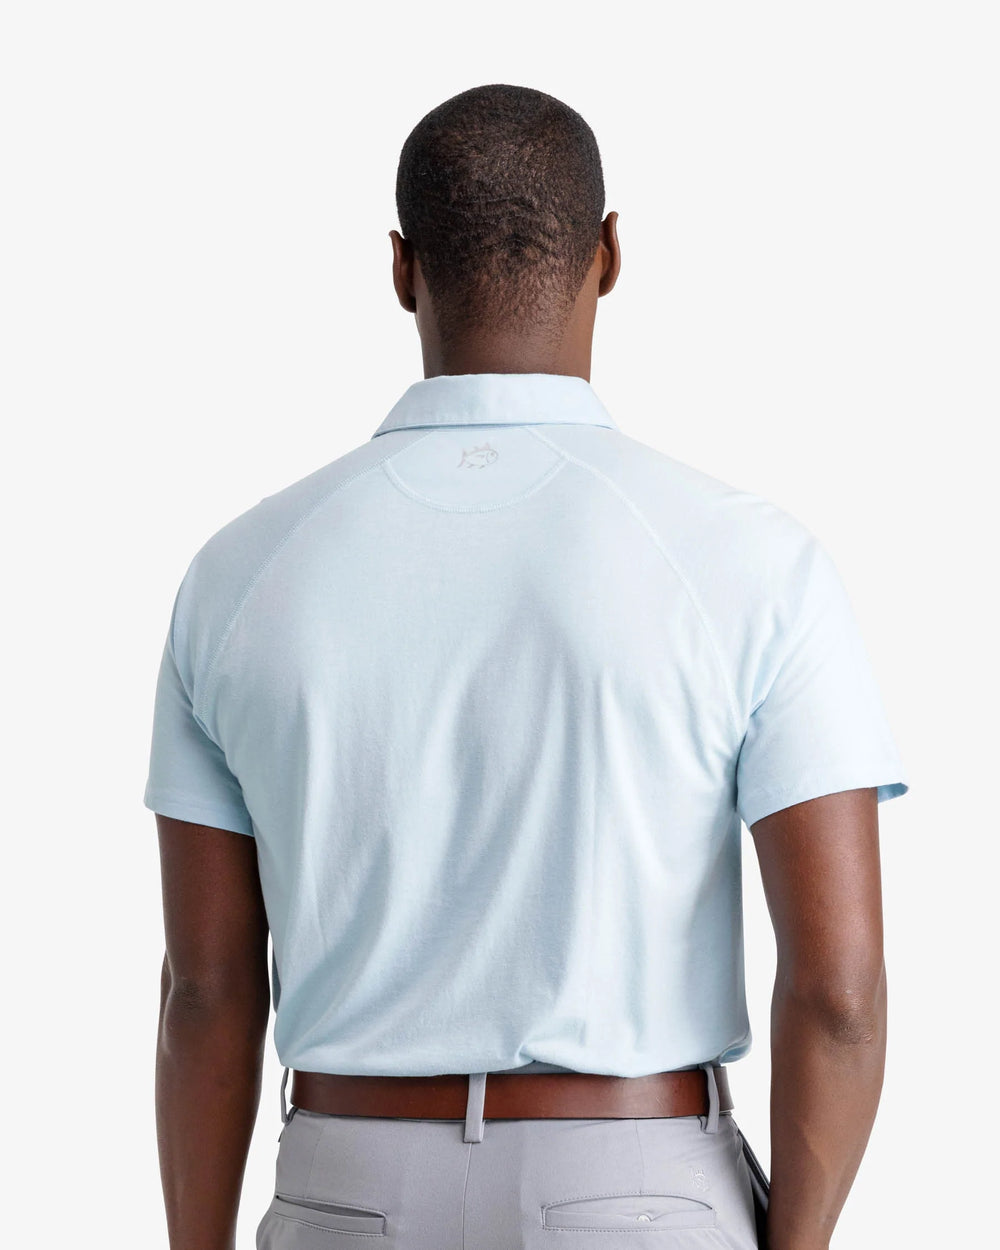 The back view of the Racquet Performance Polo Shirt by Southern Tide - Aquamarine